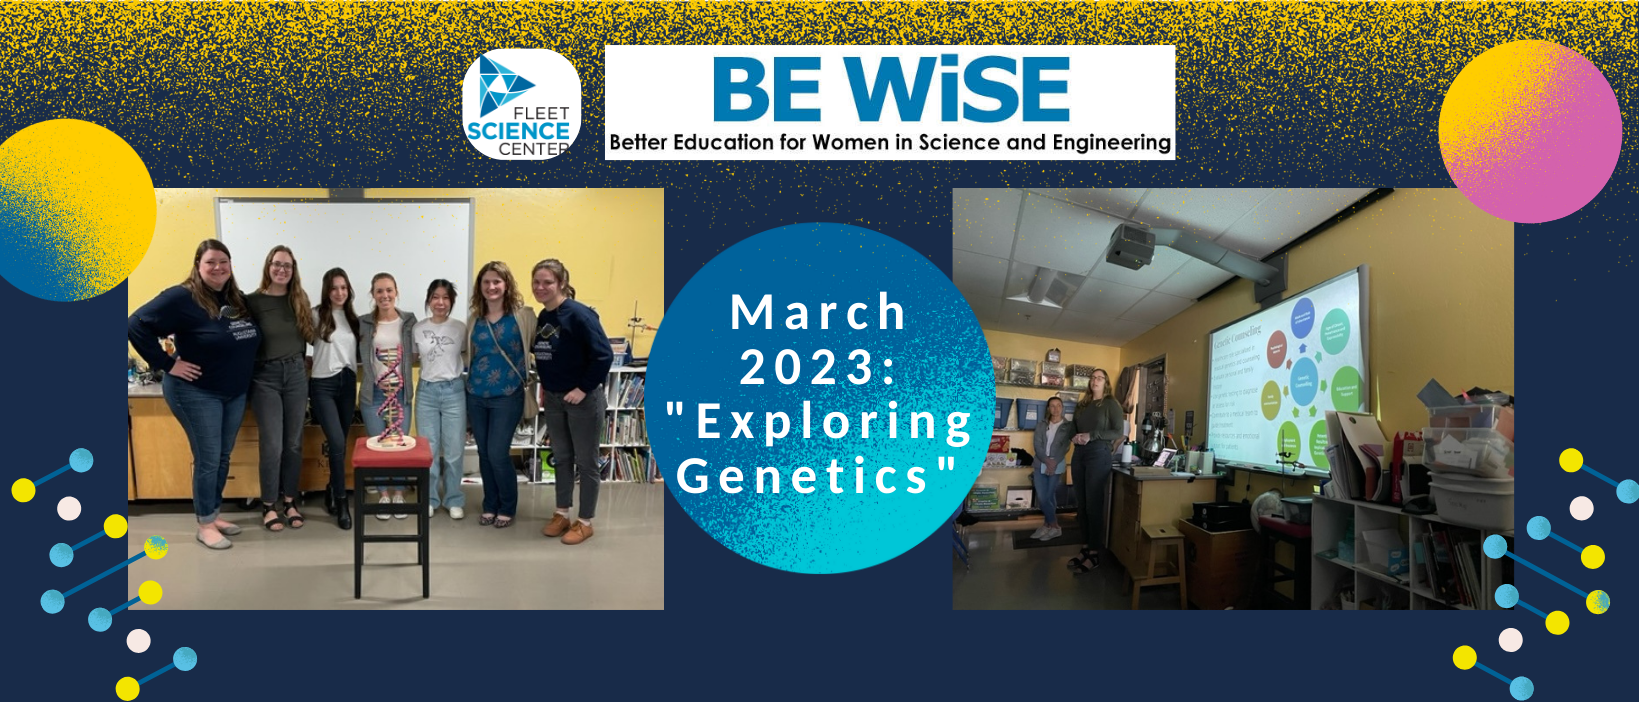 4 of 6, The Fleet Science Center logo appears next to the BE WiSE (Better Education for Women in Science and Engineering) logo at the top of the image. A picture on the left shows Taylor Berninger standing with the genetic counseling graduate students who presented the session. A picture on the right show two presenters in front of a screen giving their presentation. In the center of the image is a circle with the words "March 2023: Exploring Genetics"